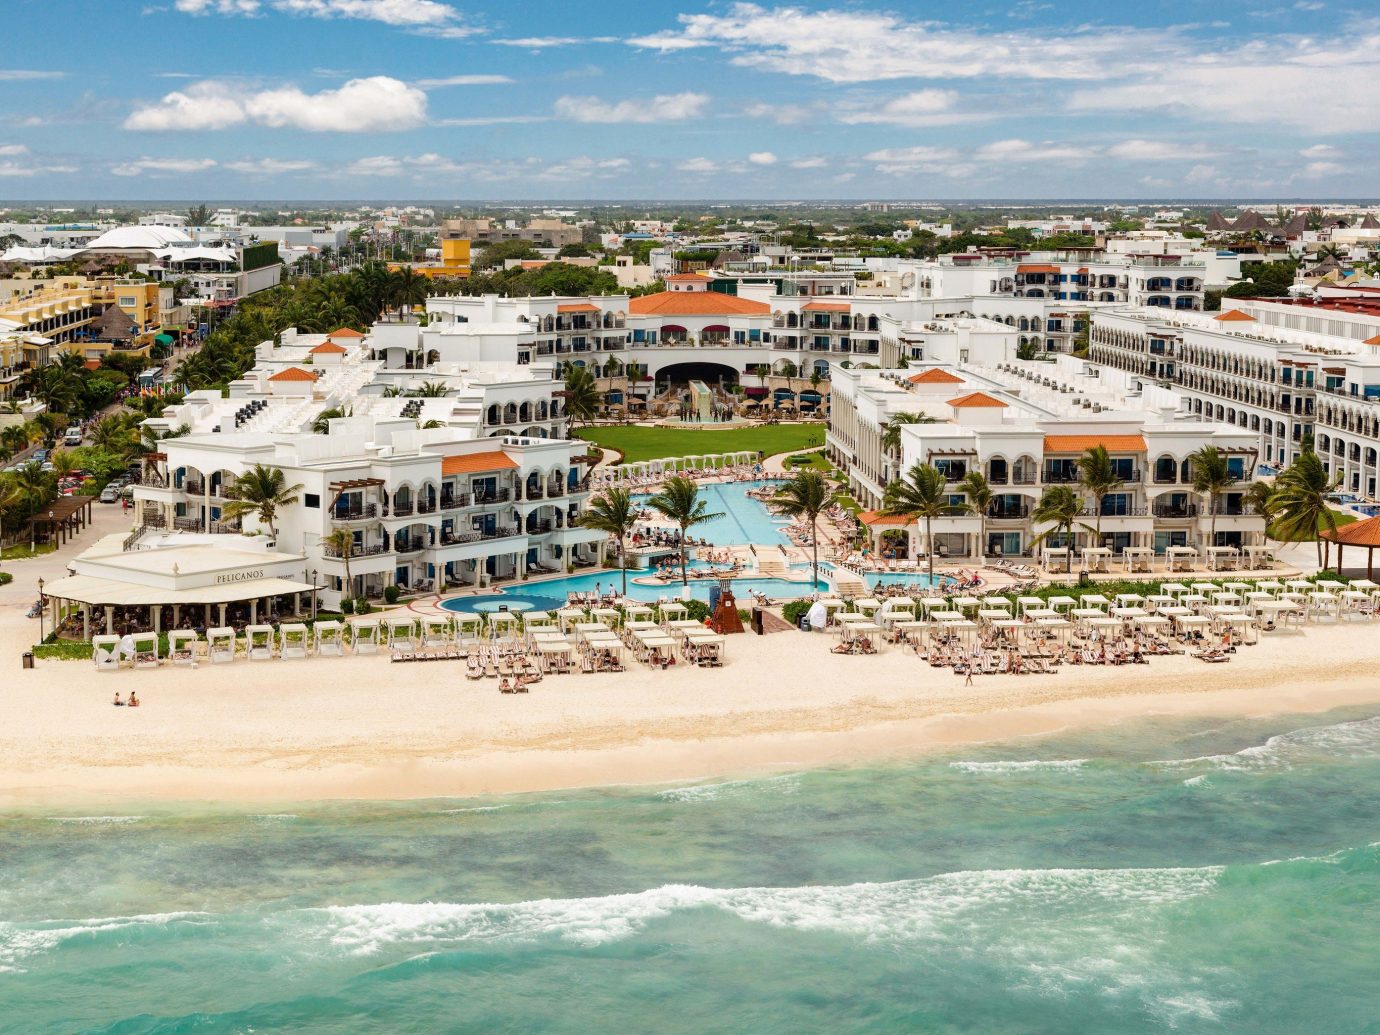 All-inclusive All-Inclusive Resorts Mexico Riviera Maya, Mexico Resort real estate tourism Coast caribbean vacation Beach bay coastal and oceanic landforms resort town estate hotel leisure